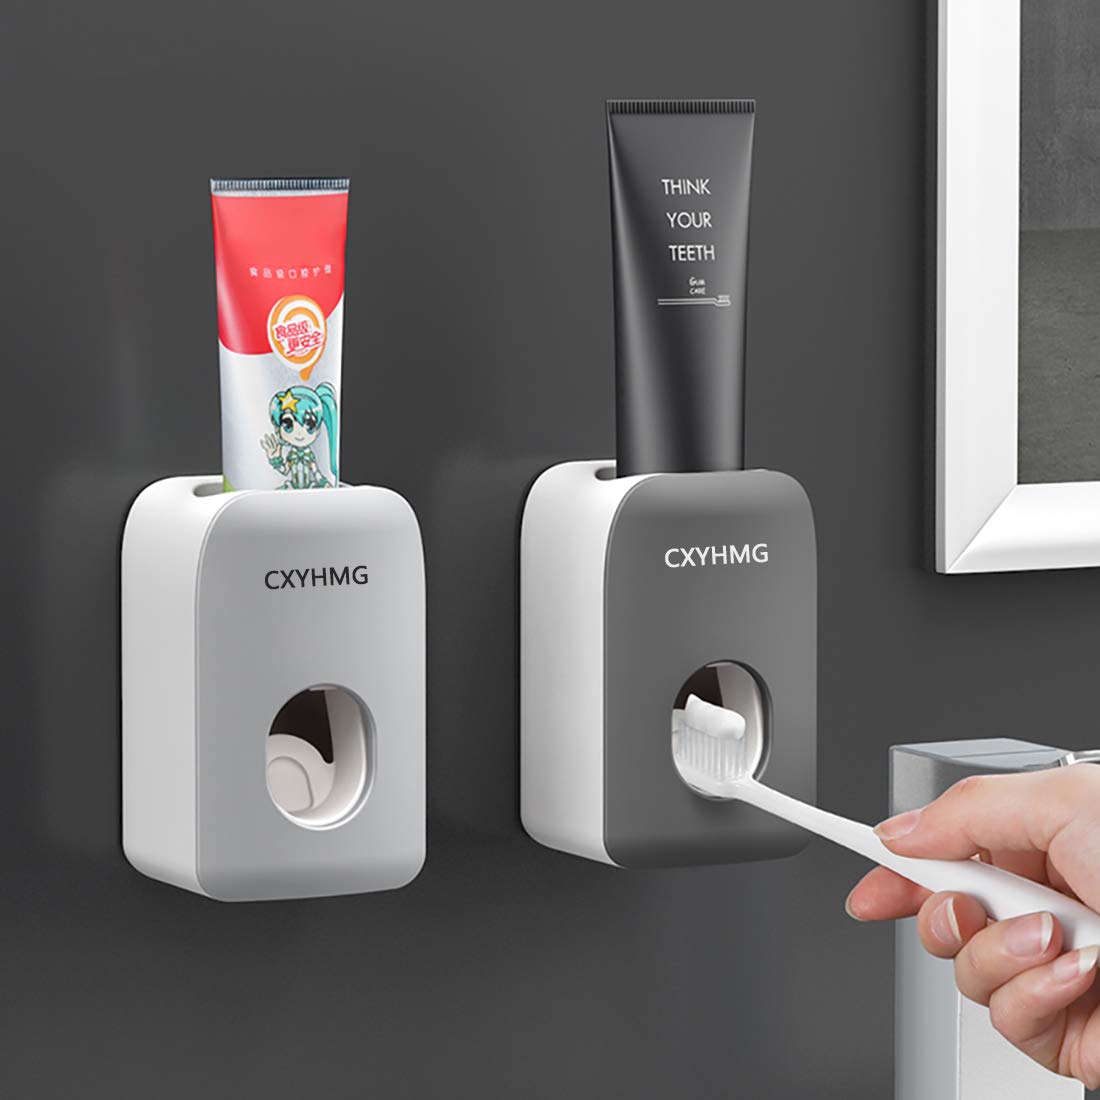 CXYHMG Toothpaste Dispenser, 2 Pcs Automatic Toothpaste Squeezer Dispenser For Kids & Family Shower, Is Wall Mount Bathroom Accessories